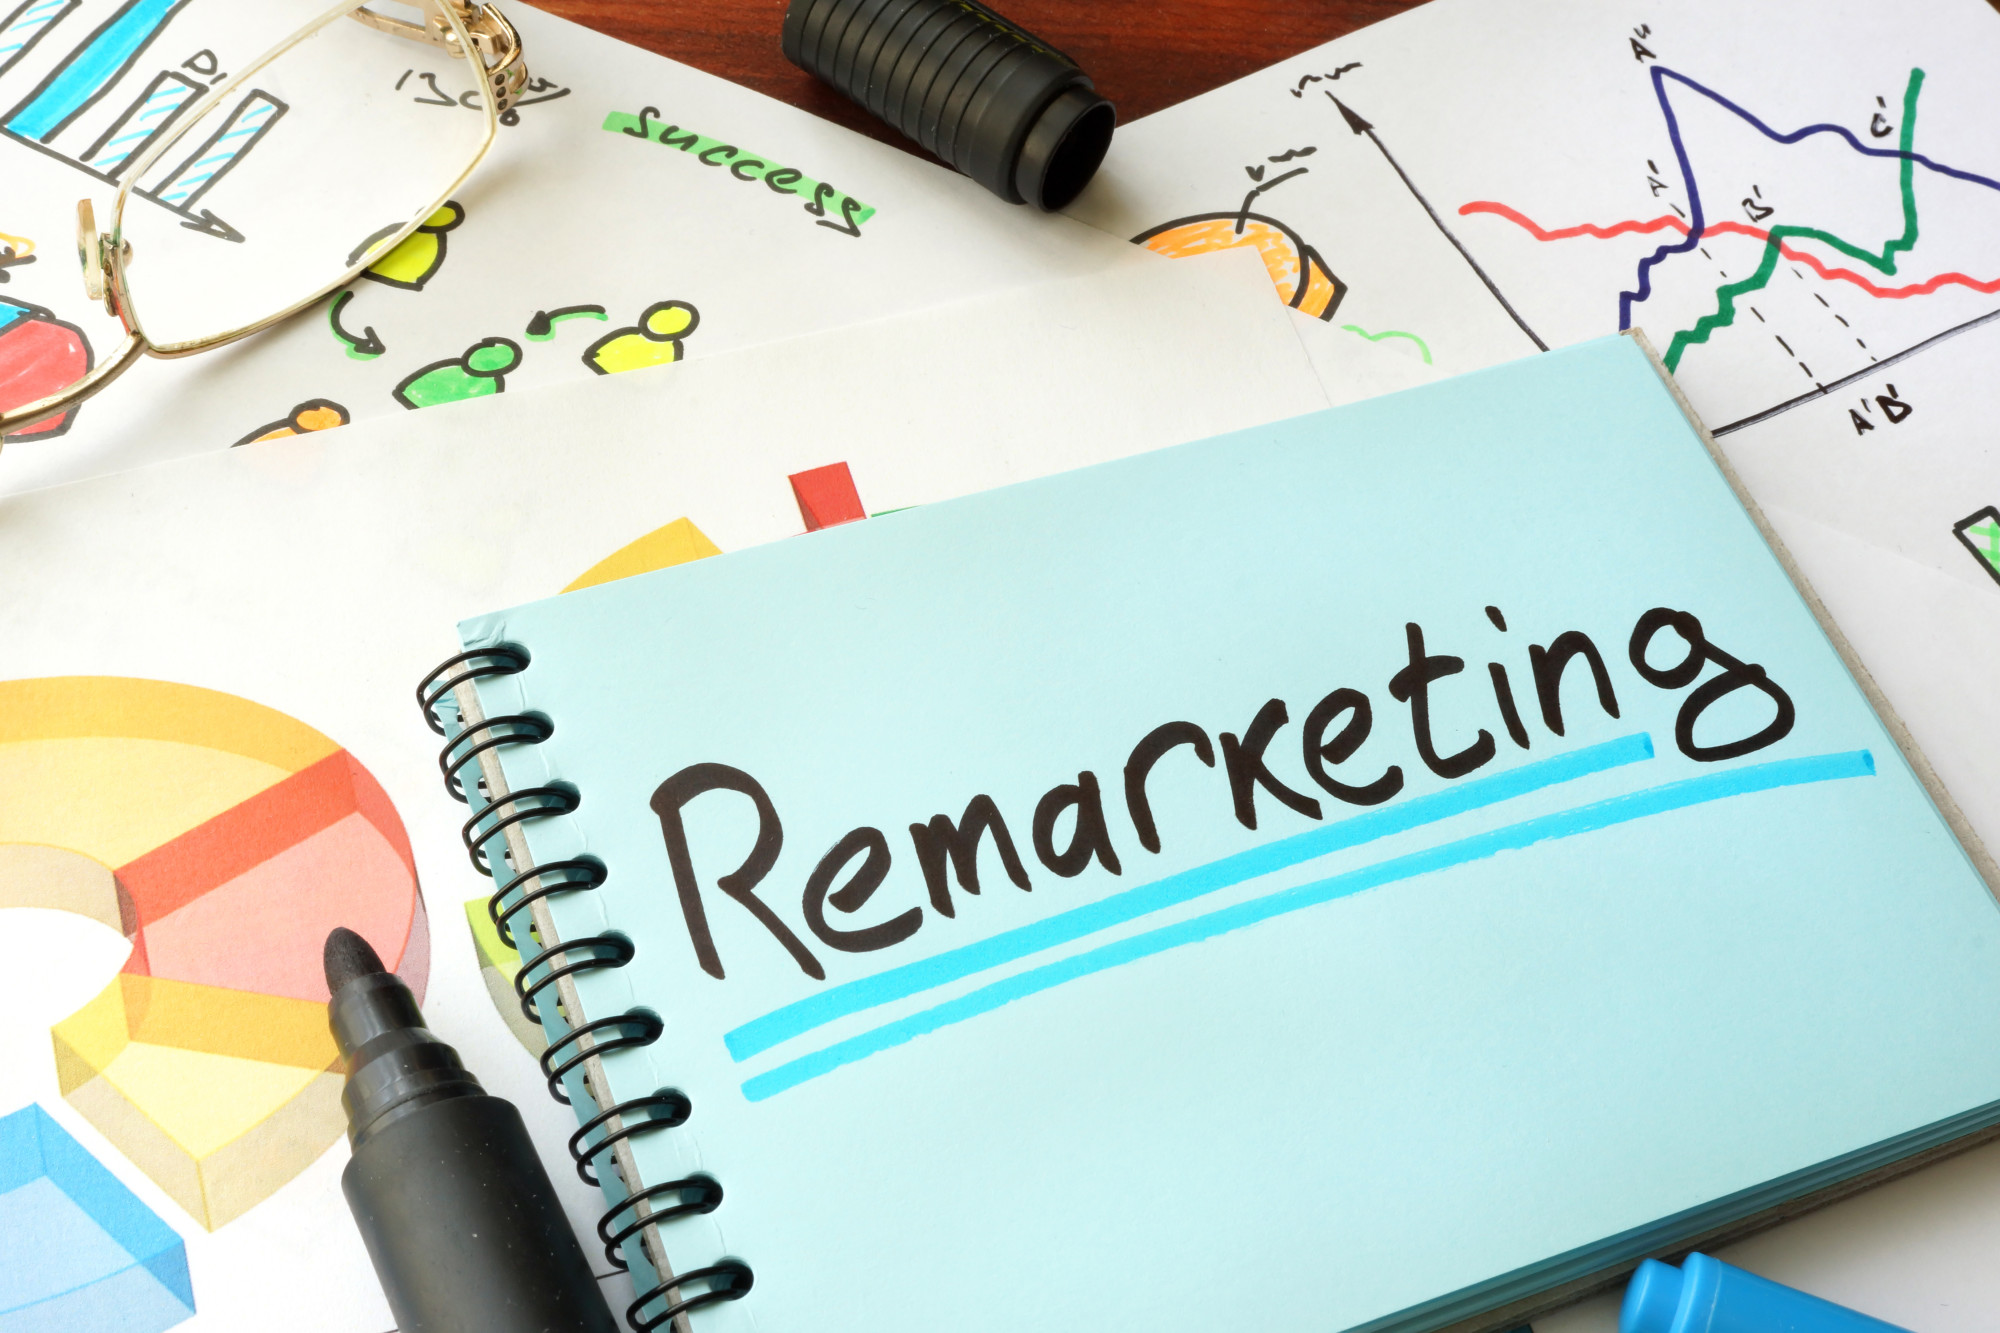 How Does Remarketing Work in Google Ads?